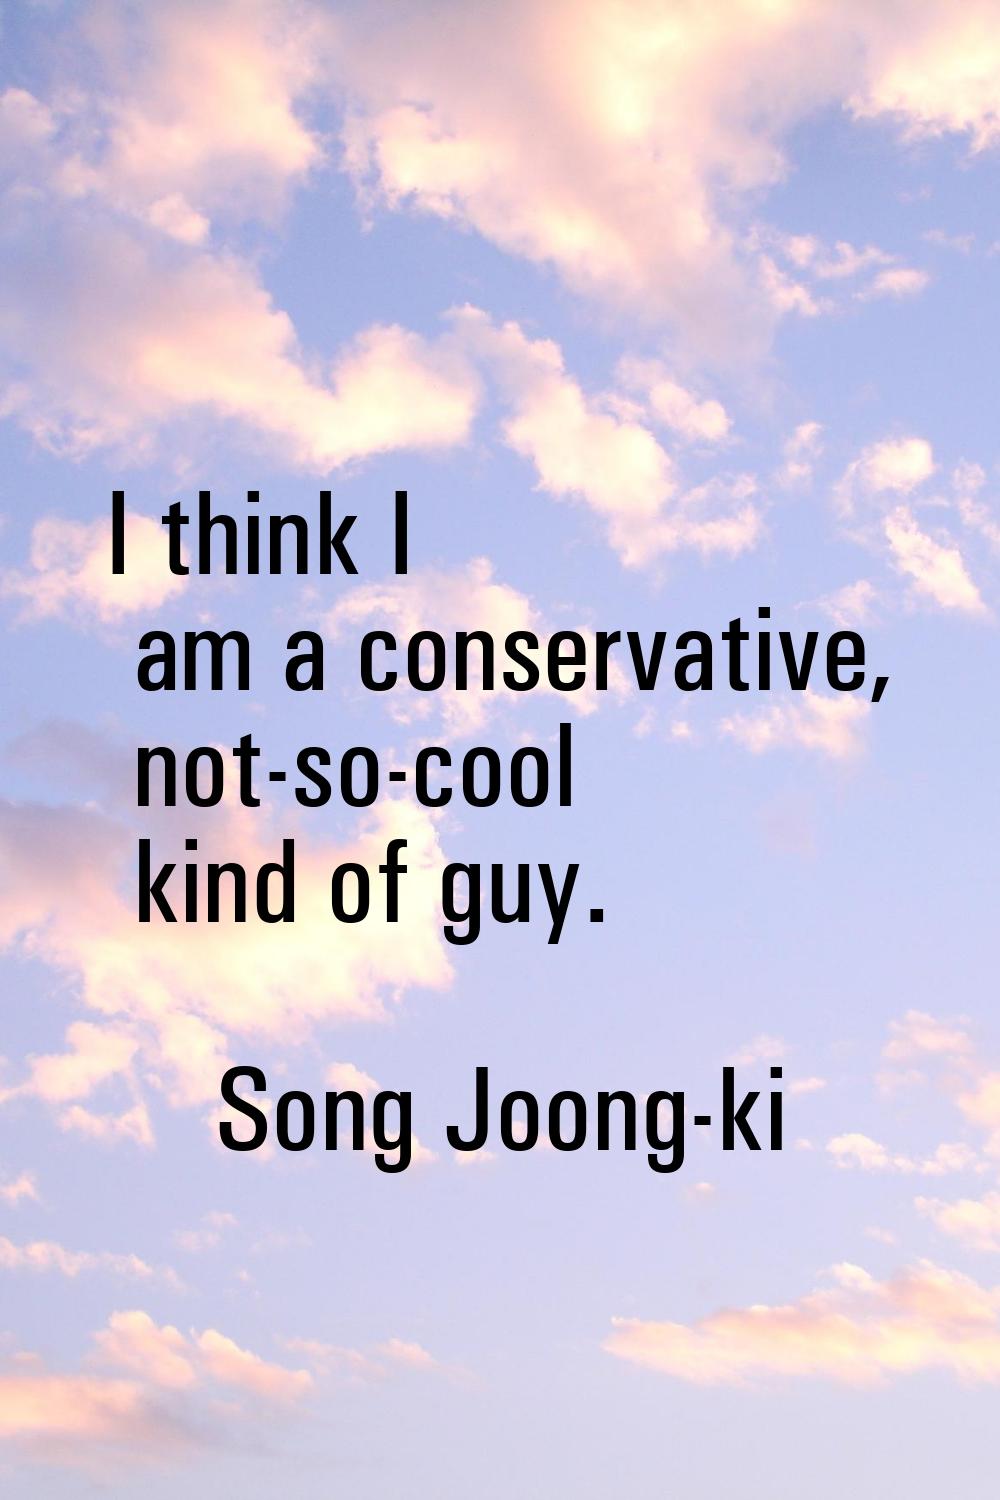 I think I am a conservative, not-so-cool kind of guy.